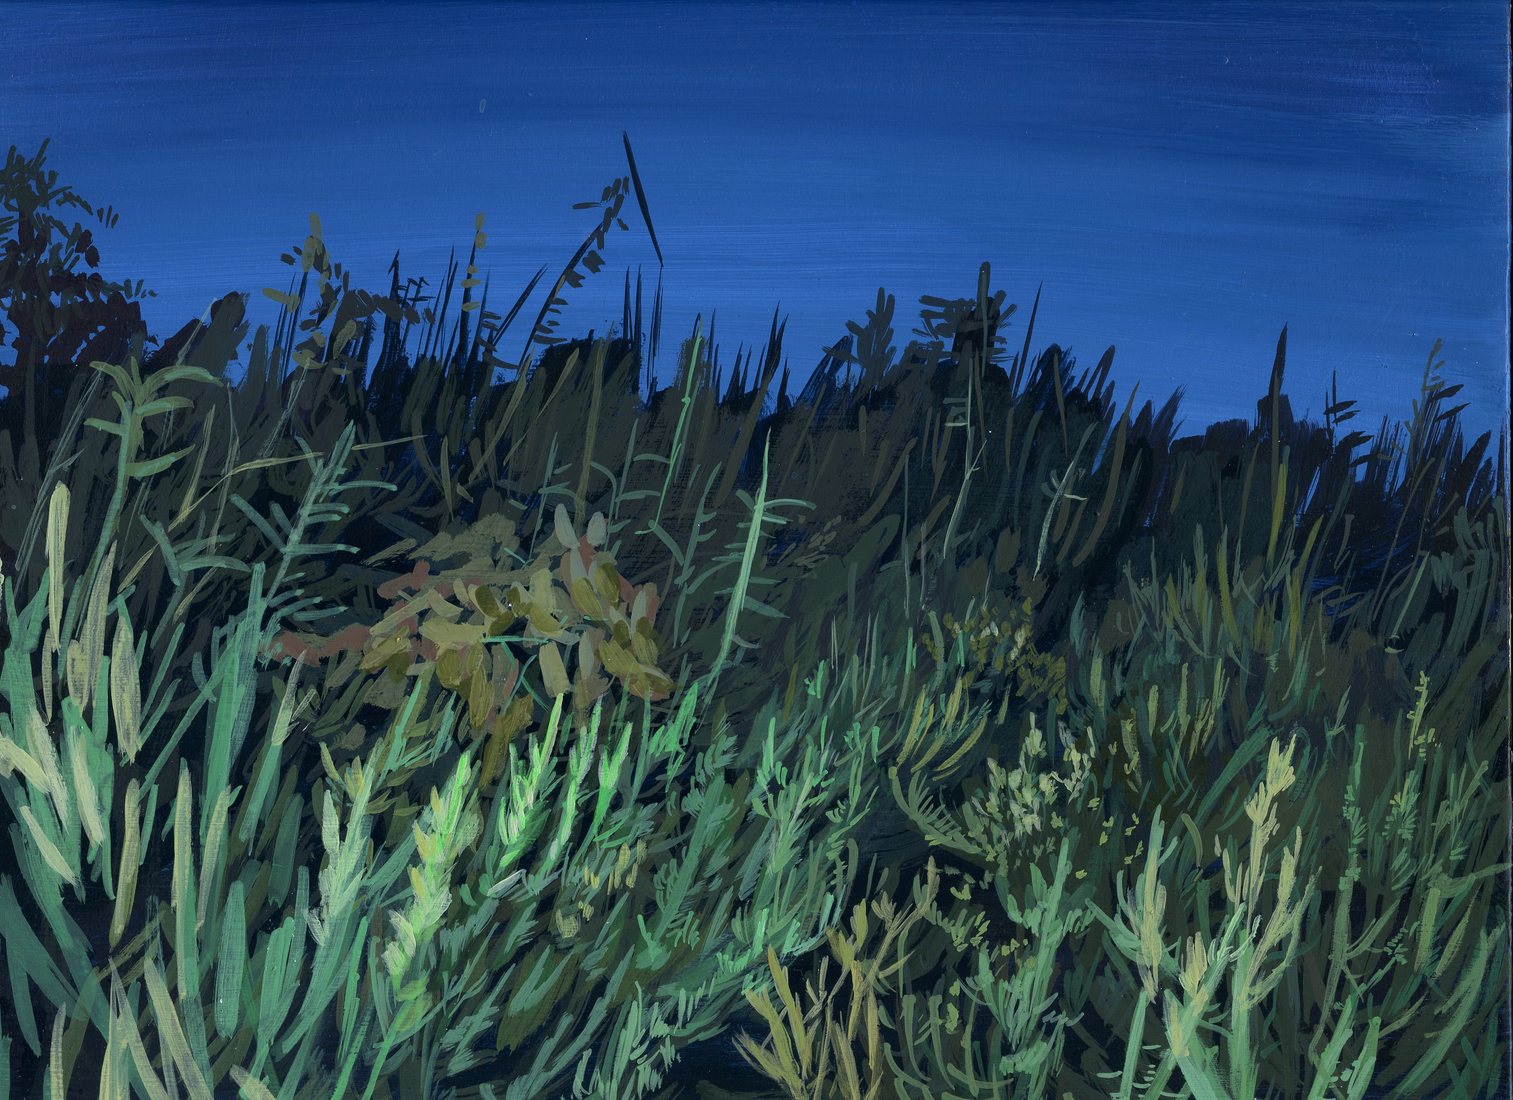 A landscape of shrubbery at night.